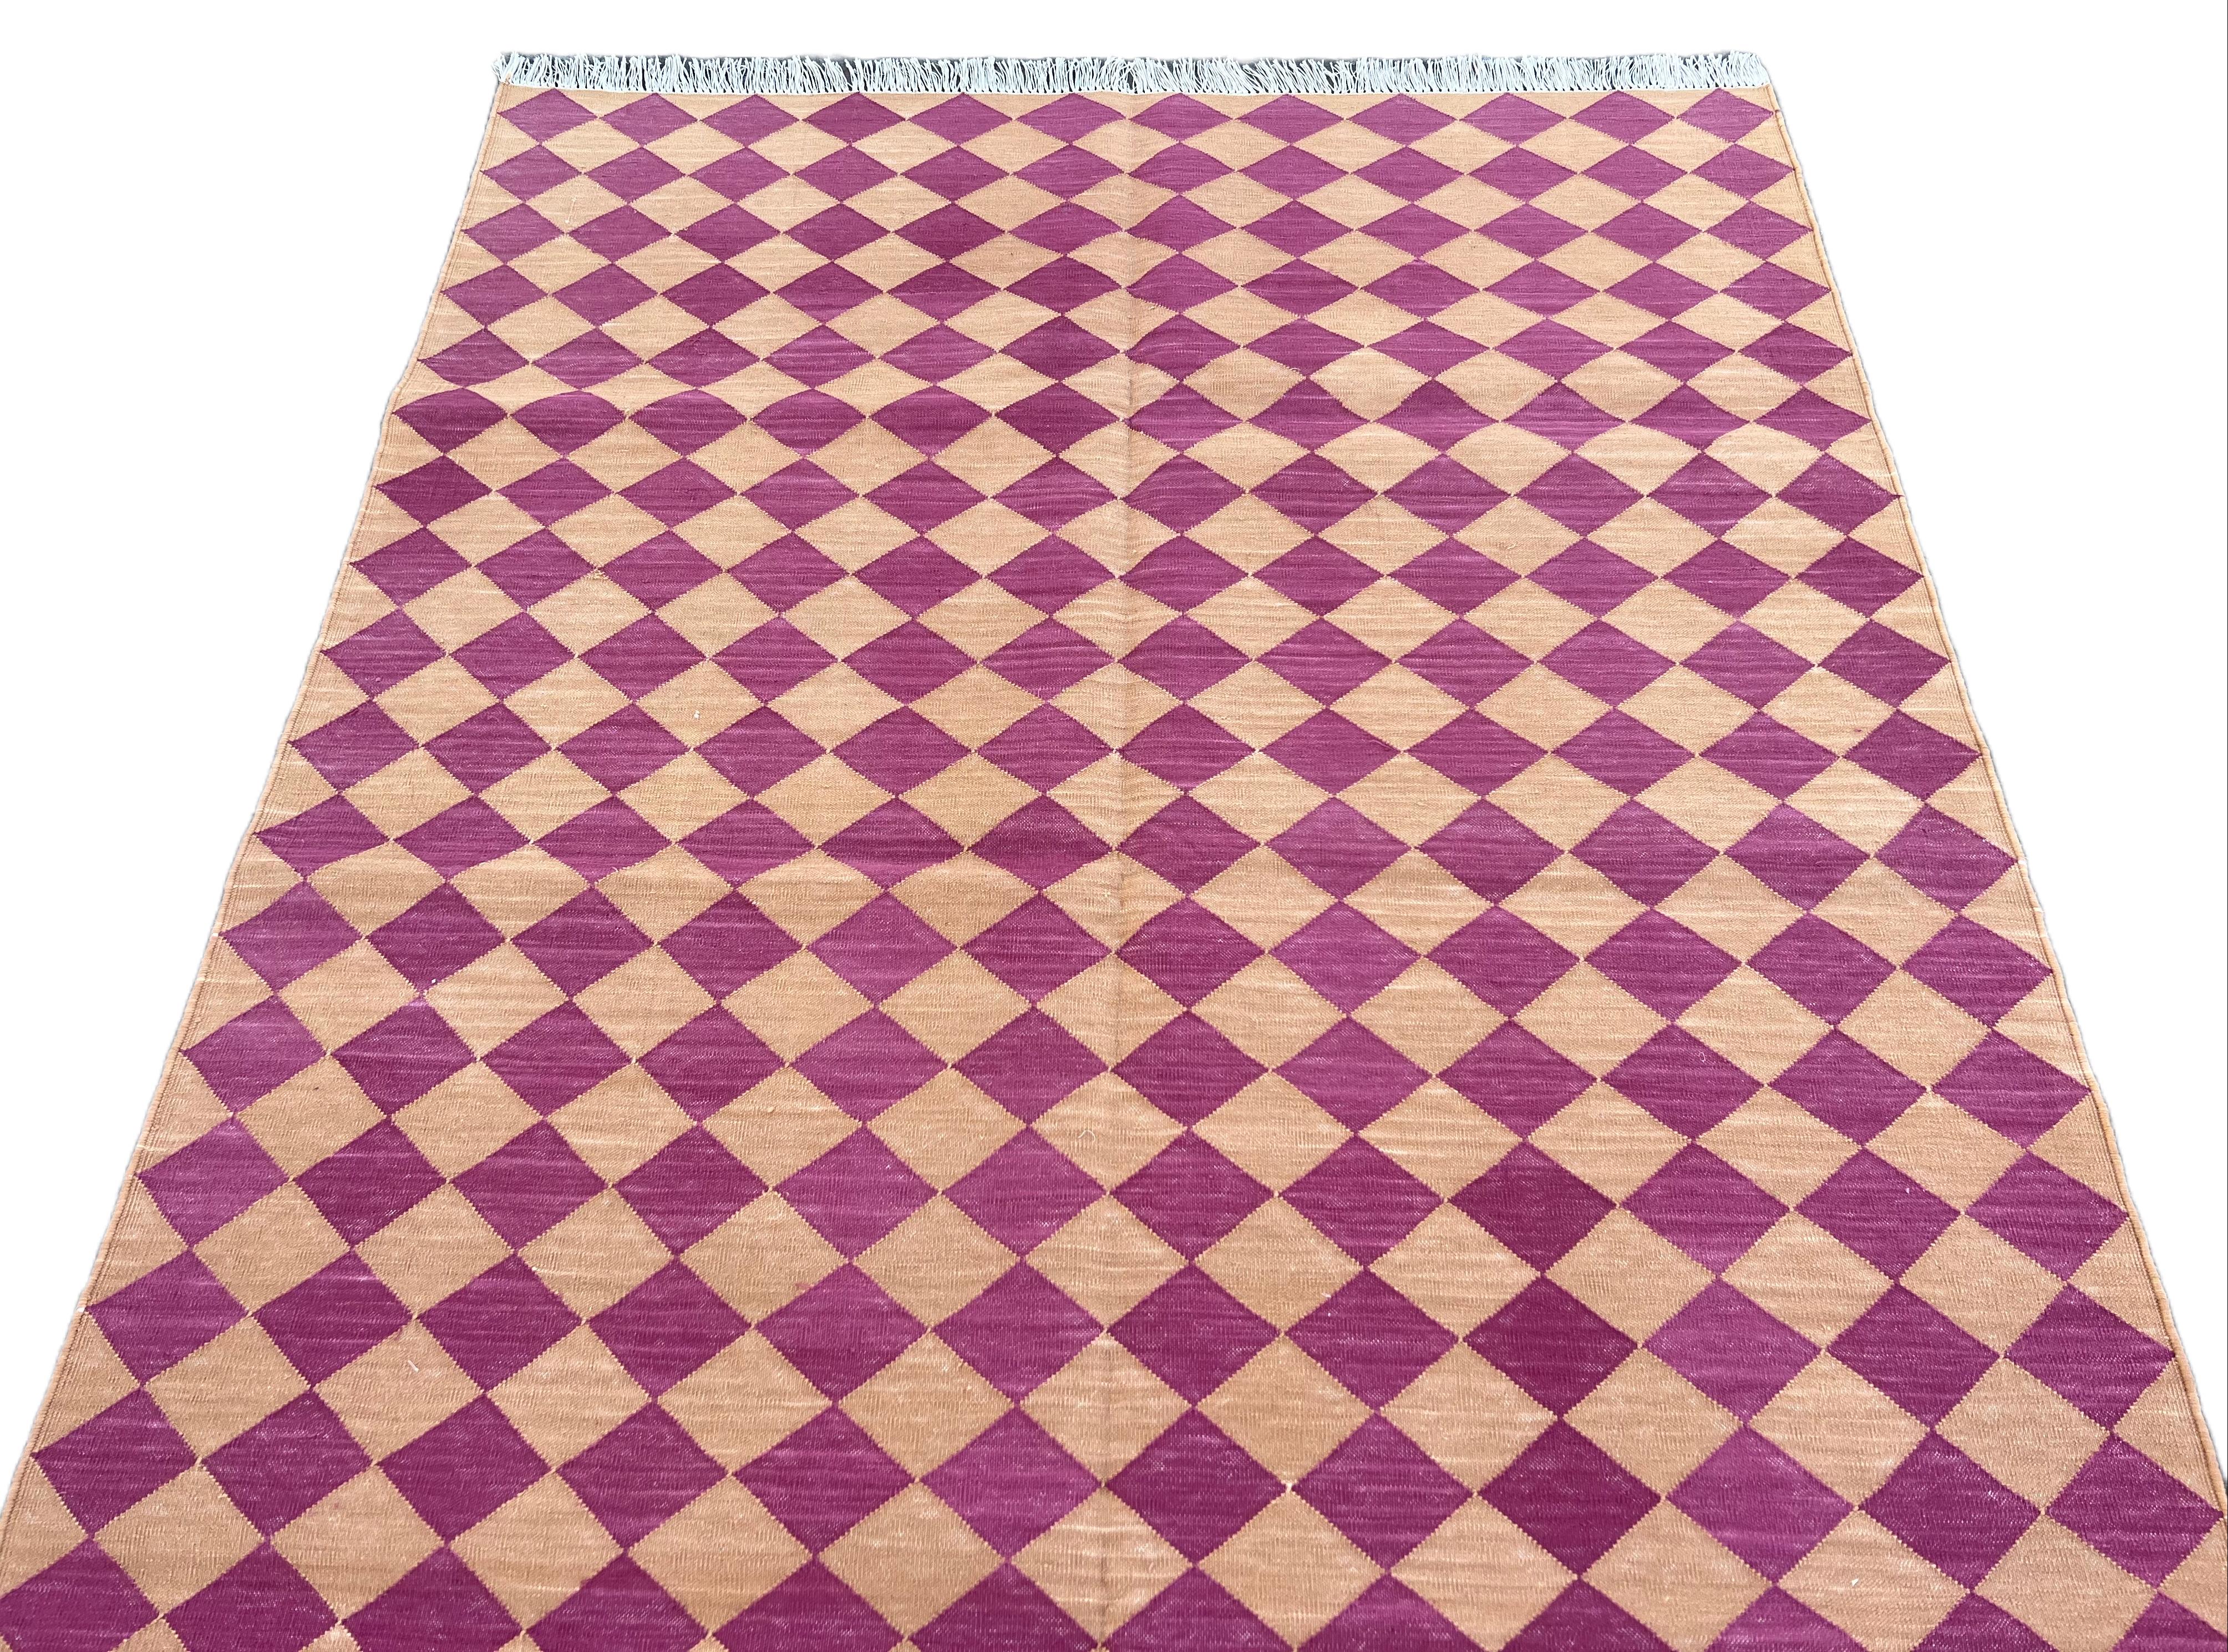 Handmade Cotton Area Flat Weave Rug, 4x6 Pink And Tan Checked Indian Dhurrie Rug For Sale 1